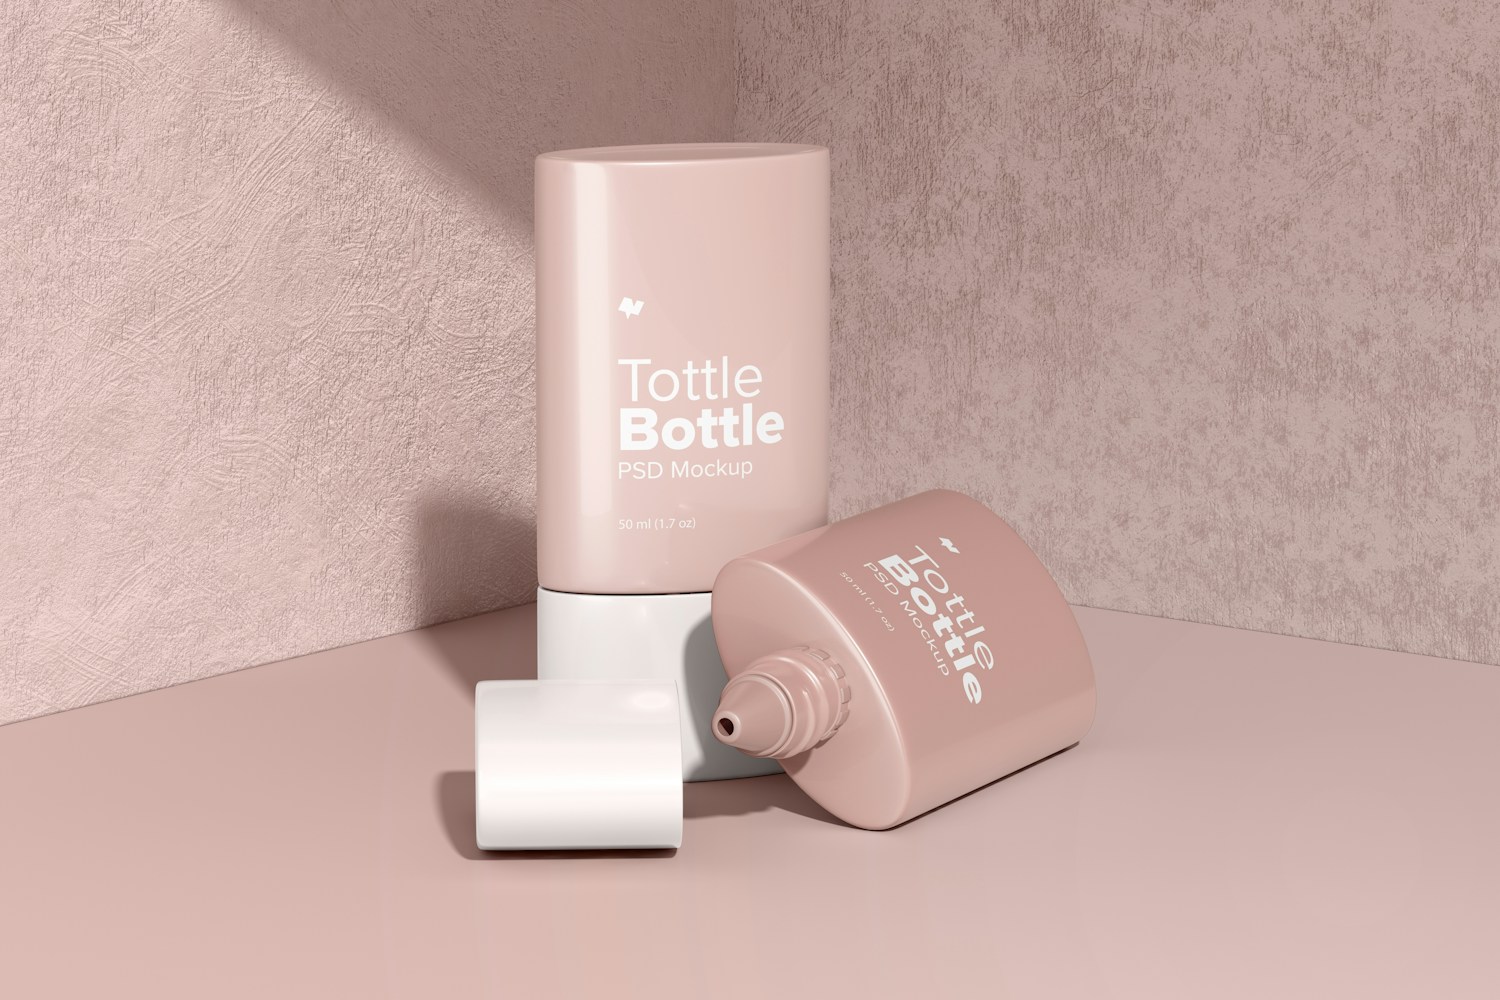 Tottle Bottles Mockup, Opened and Closed